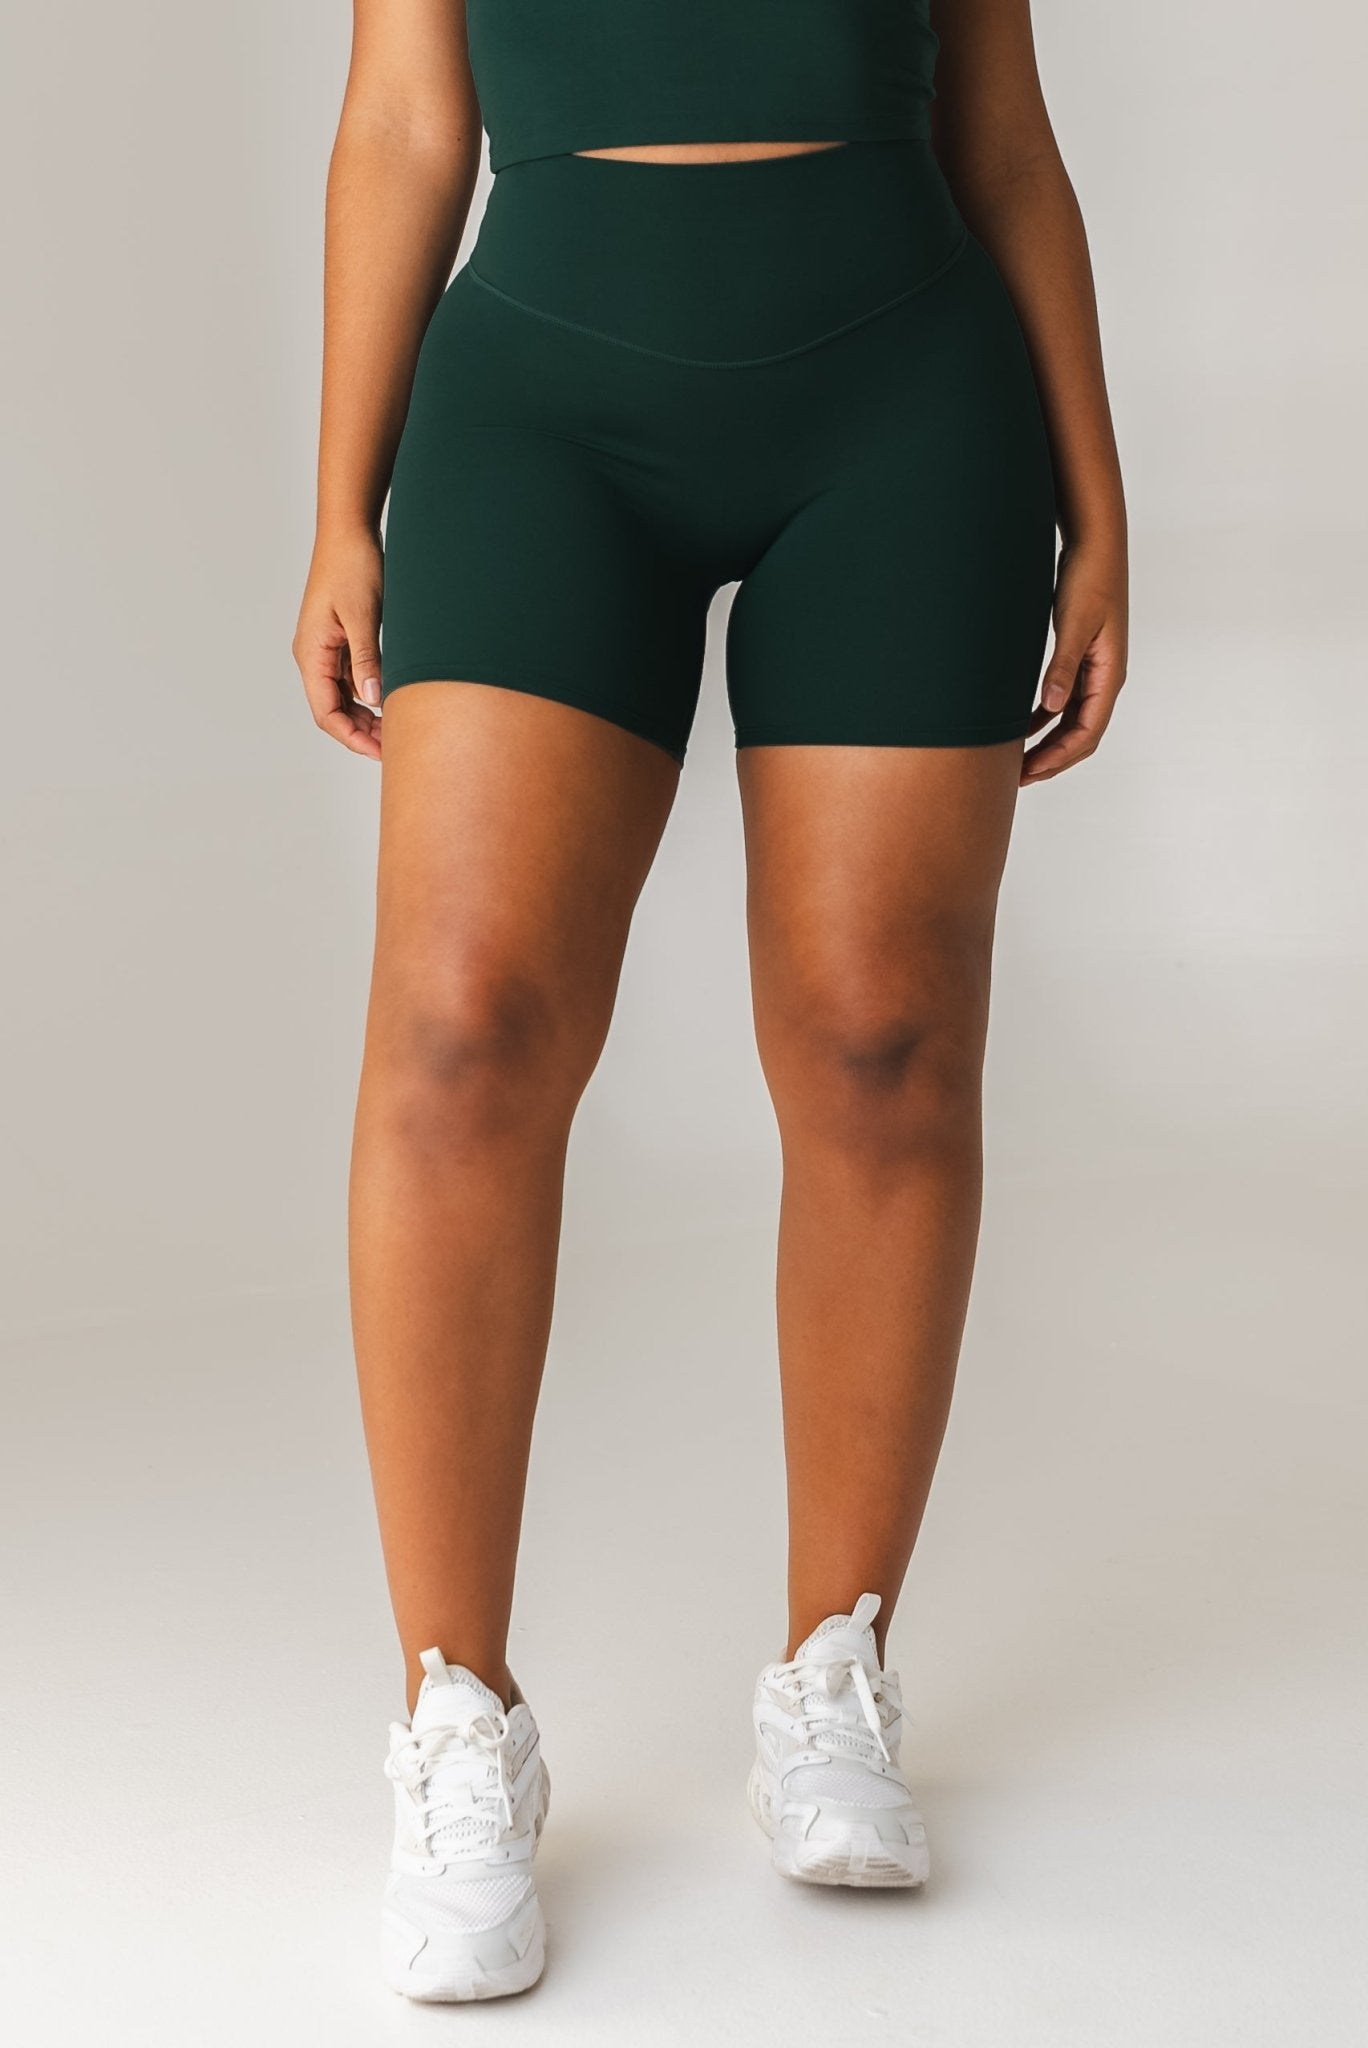 Women's Athletic Shorts - Premium Apparel from Vitality – Tagged spandex